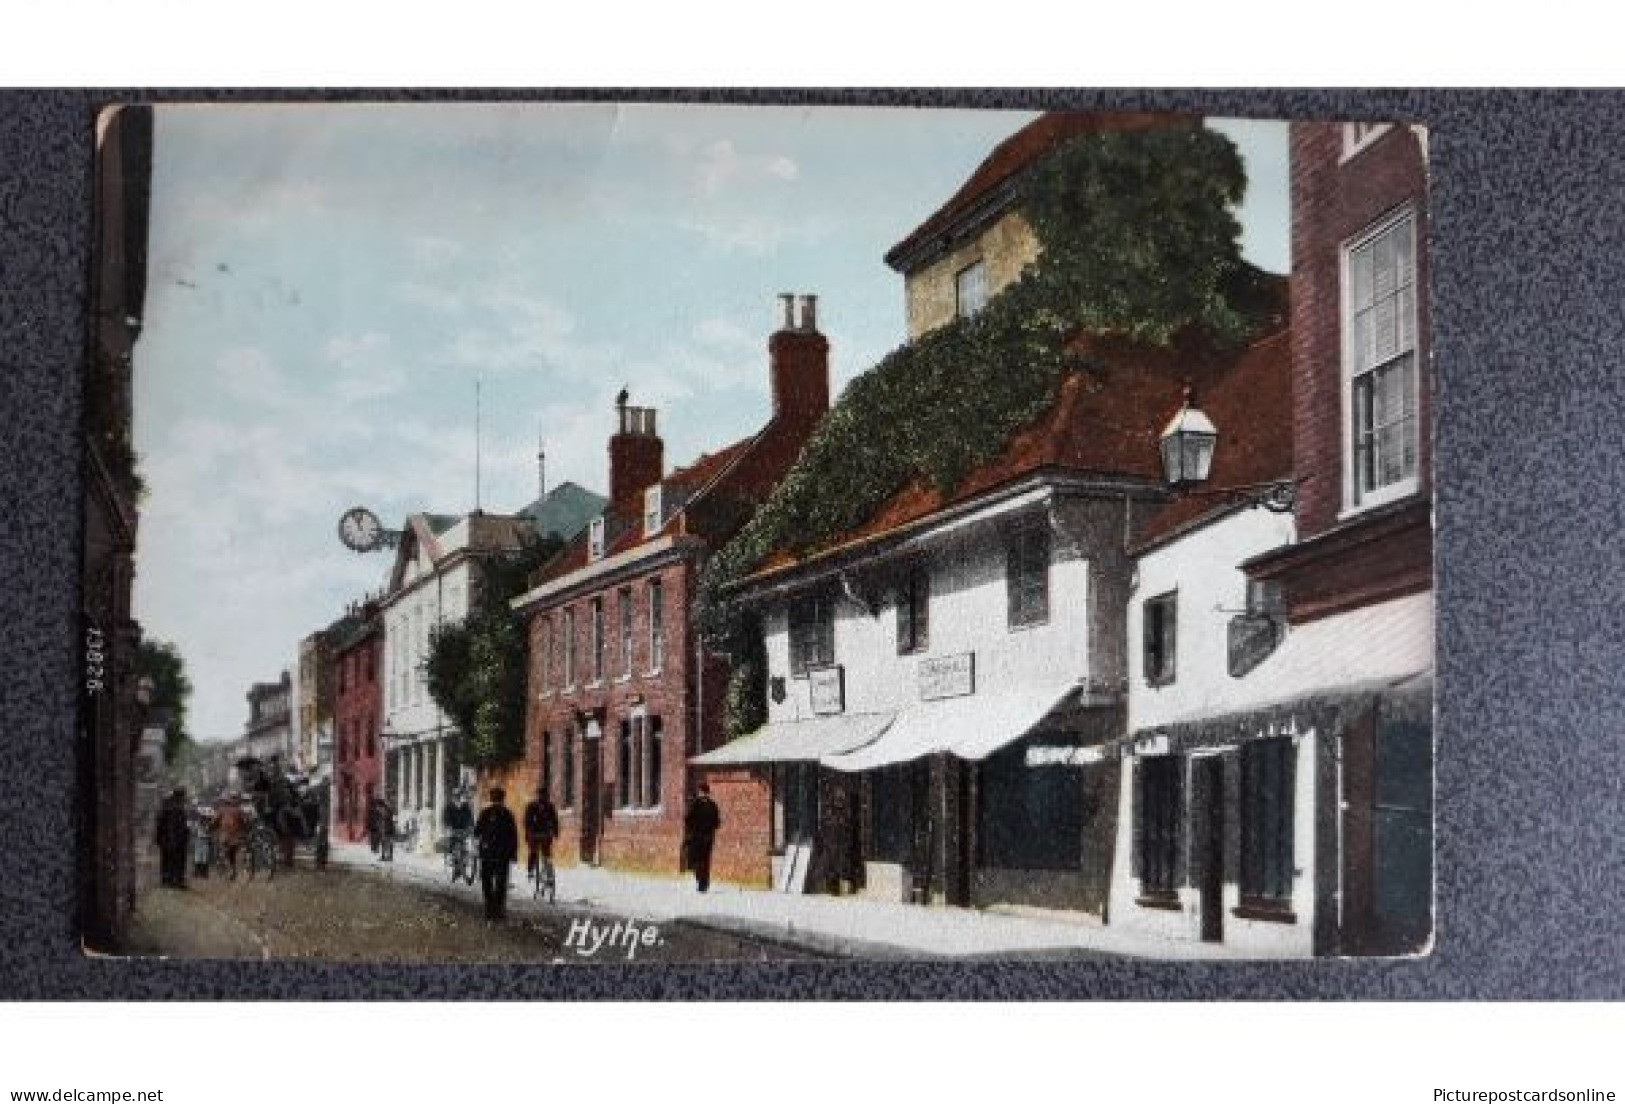 HYTHE OLD COLOUR POSTCARD KENT - Rochester